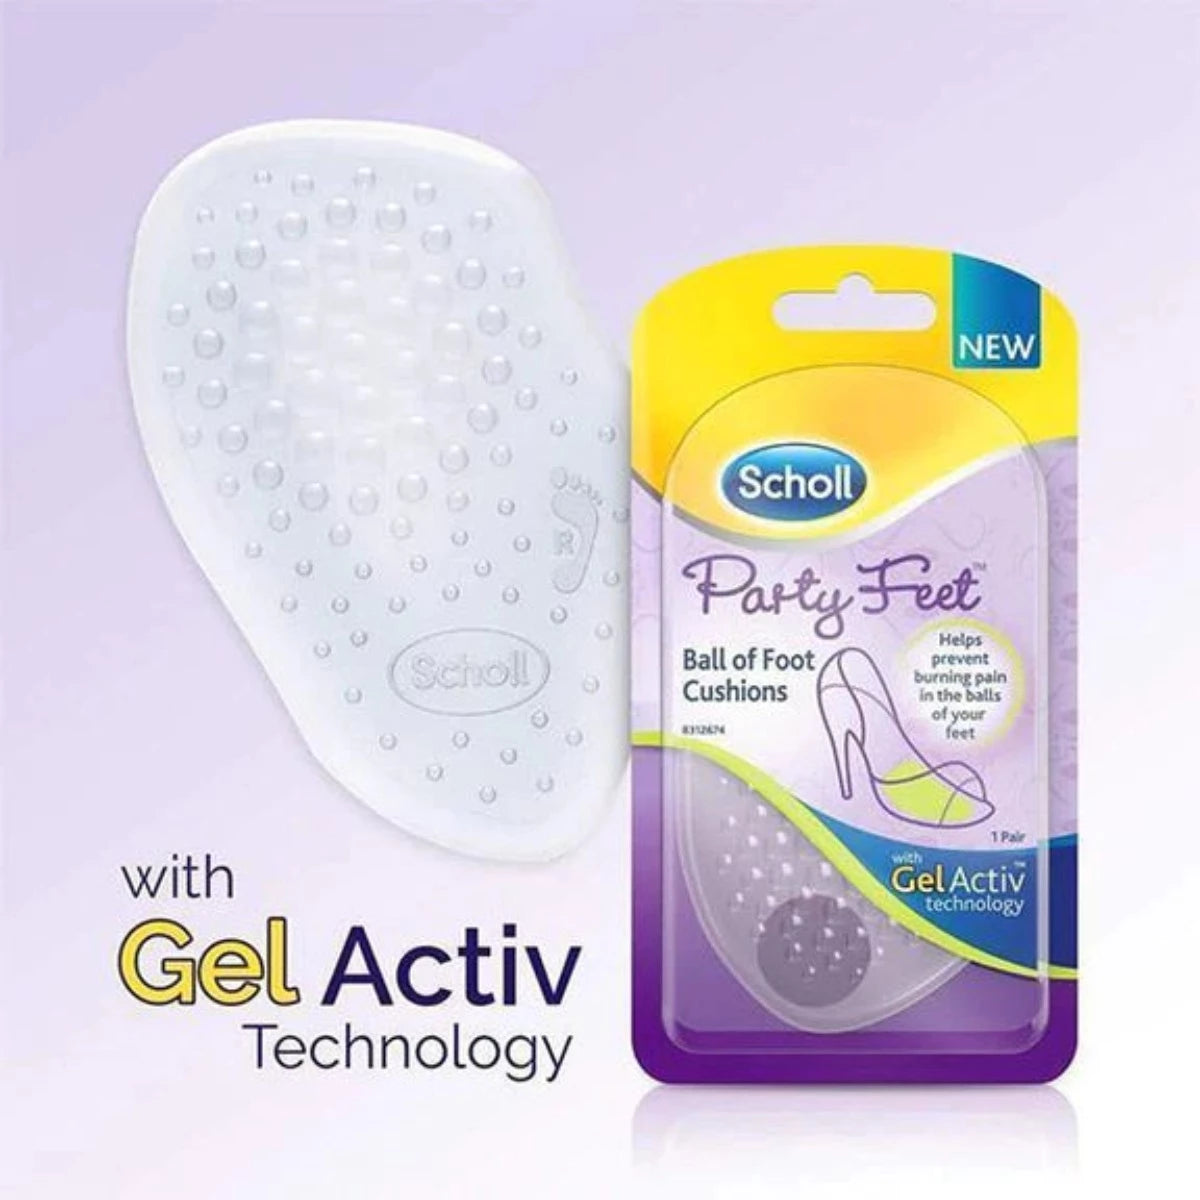 Scholl Party Feet Ball Of Foot Cushions